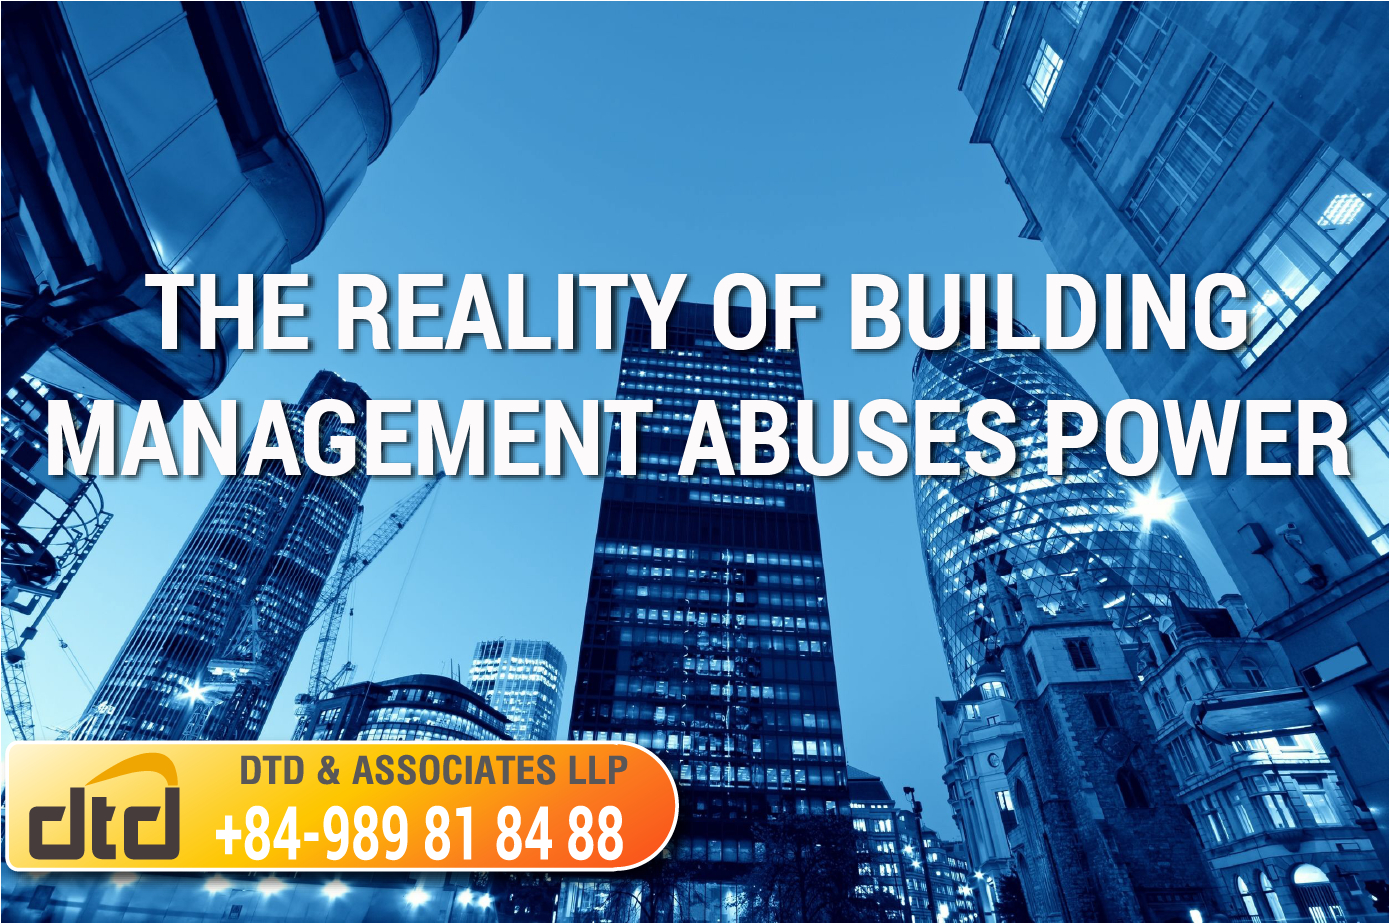 THE REALITY OF BUILDING MANAGEMENT ABUSES POWER - LEGAL ASSESSMENTS